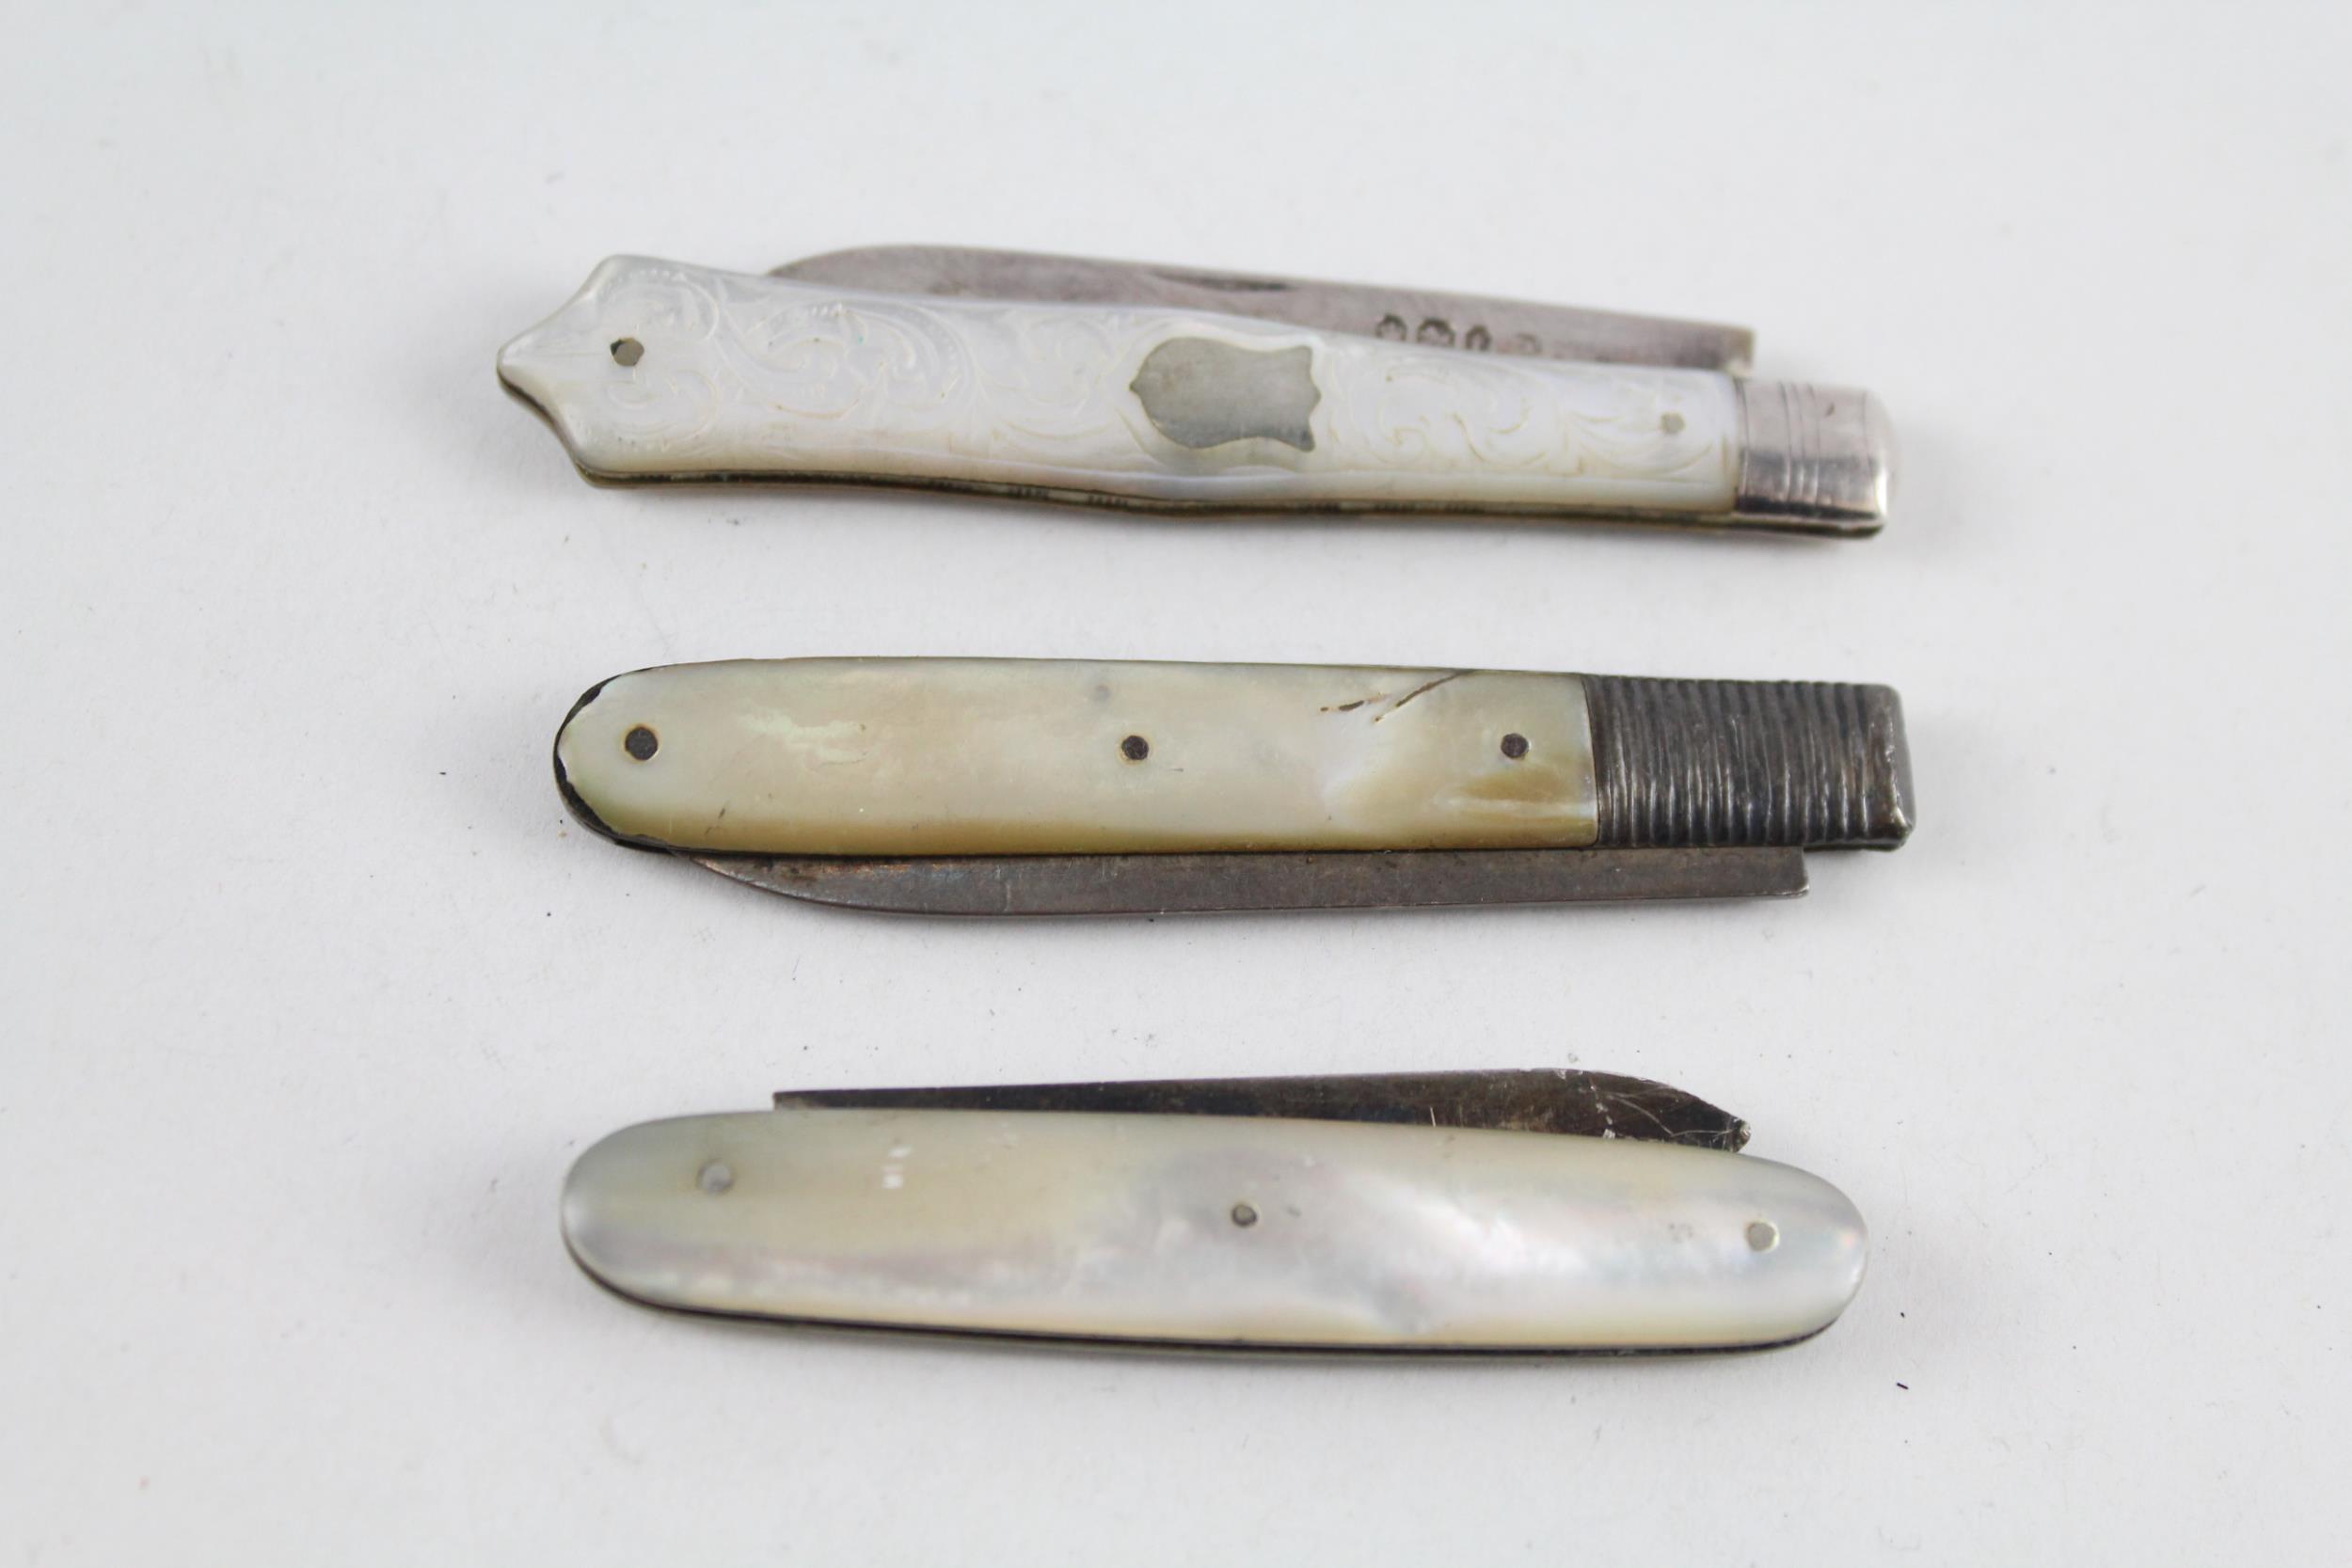 3 x Antique HM .925 Sterling Silver & Mother of Pearl Handled Fruit Knives 61g // In antique